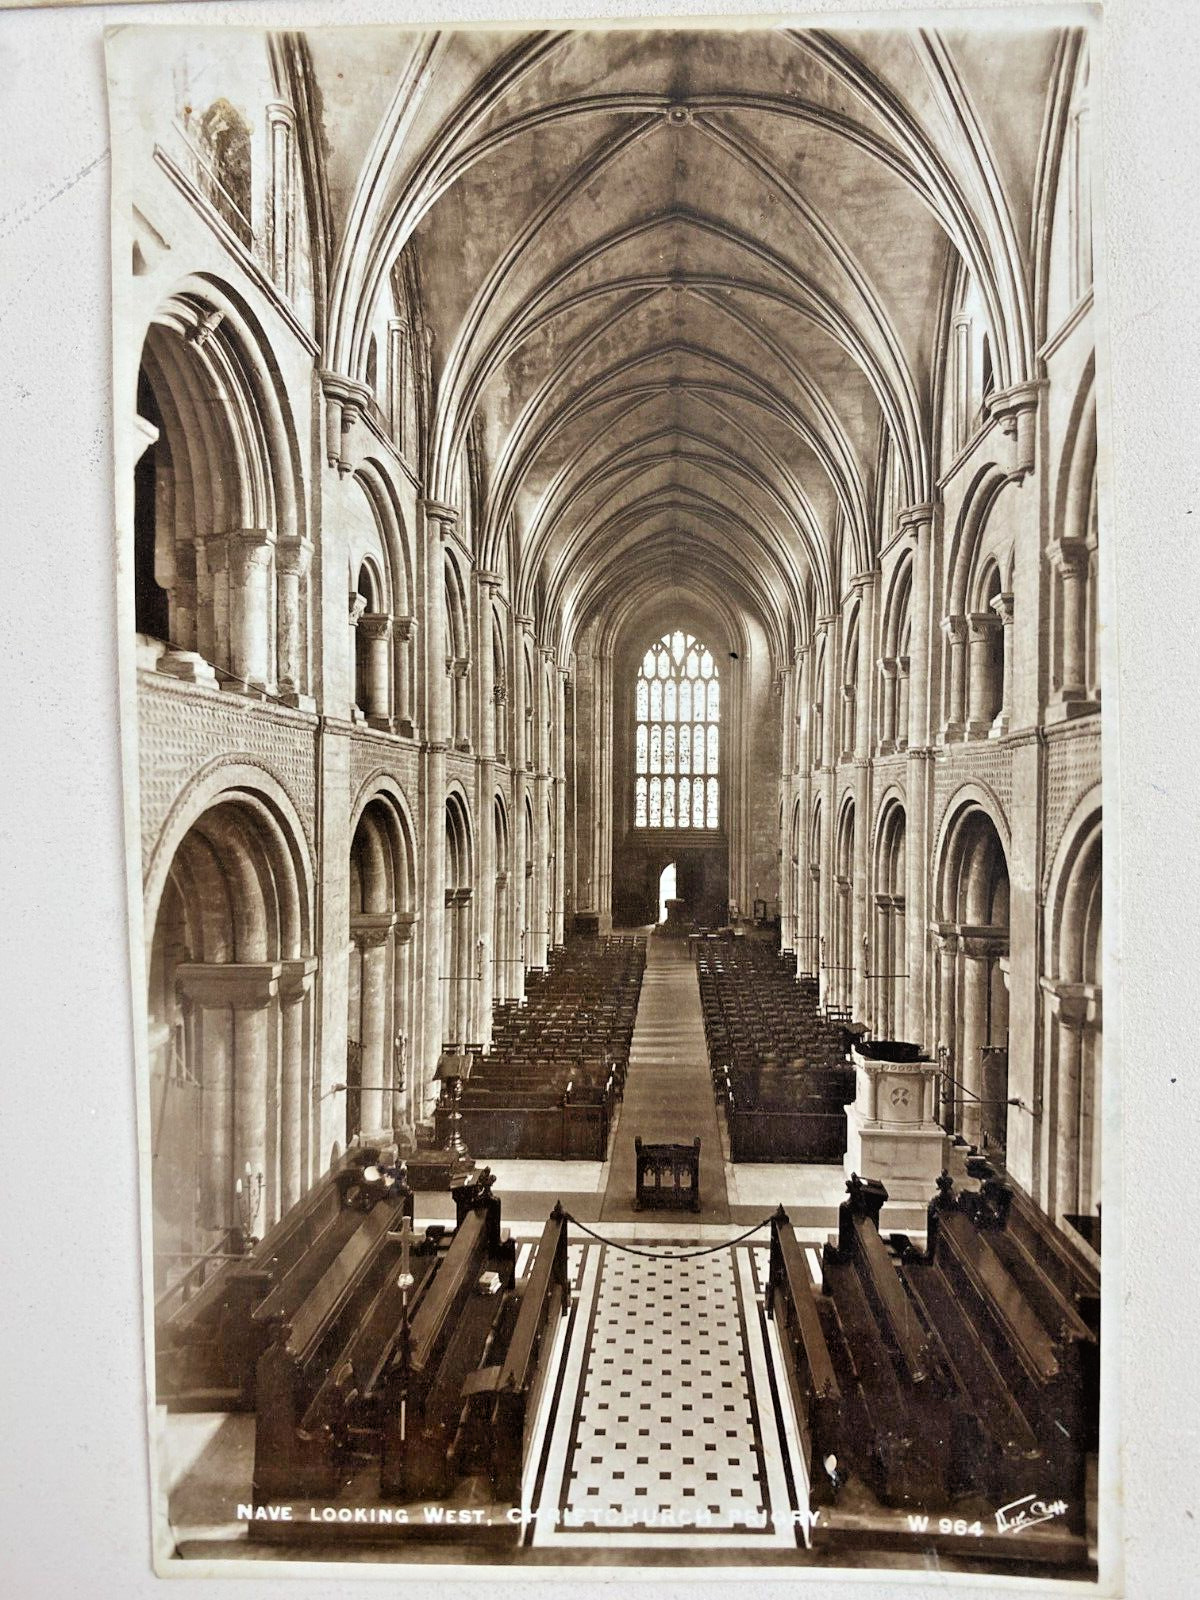 Postcard Real Photograph Christ Church Priory Dorset, UK Nave Looking West W964